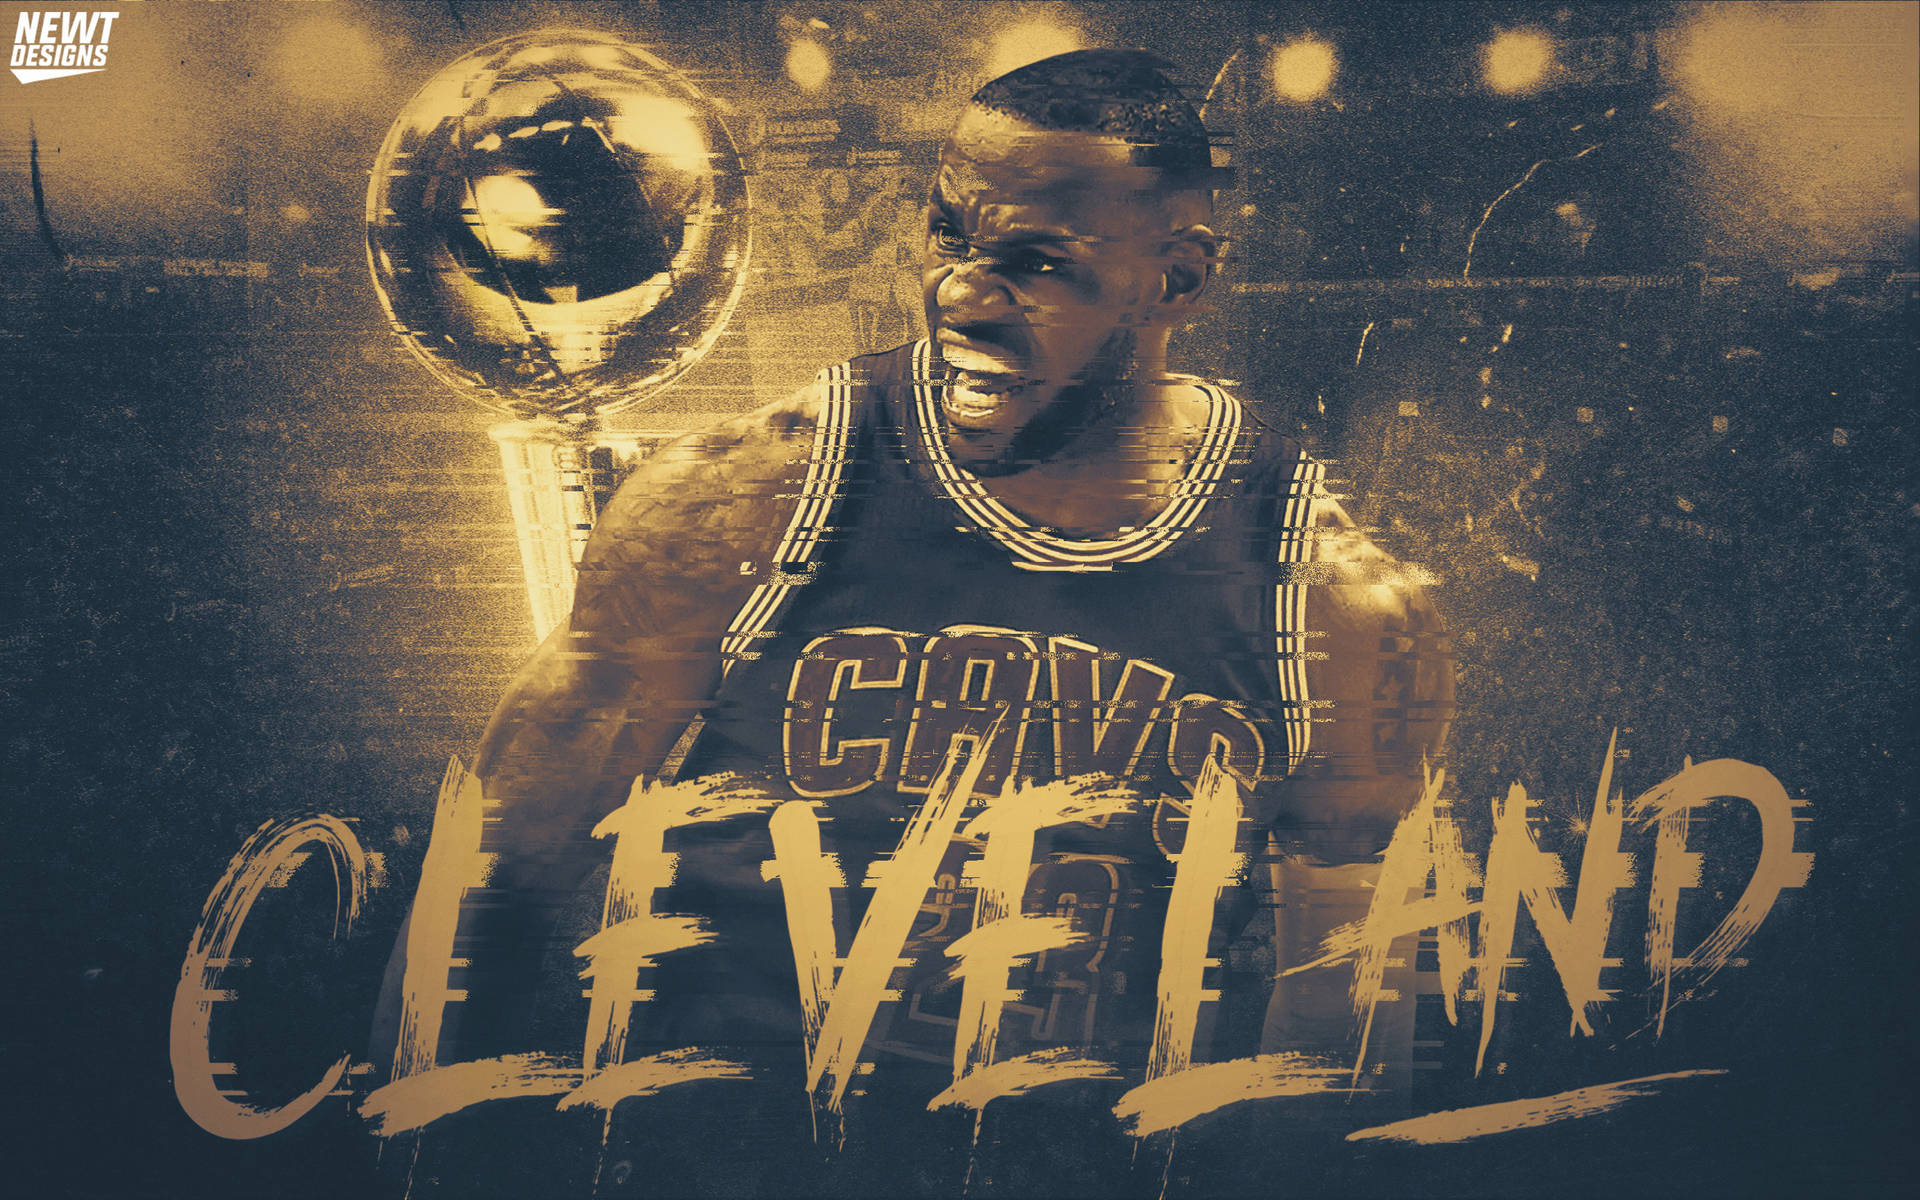 Lebron James With Cool Championship Trophy Background